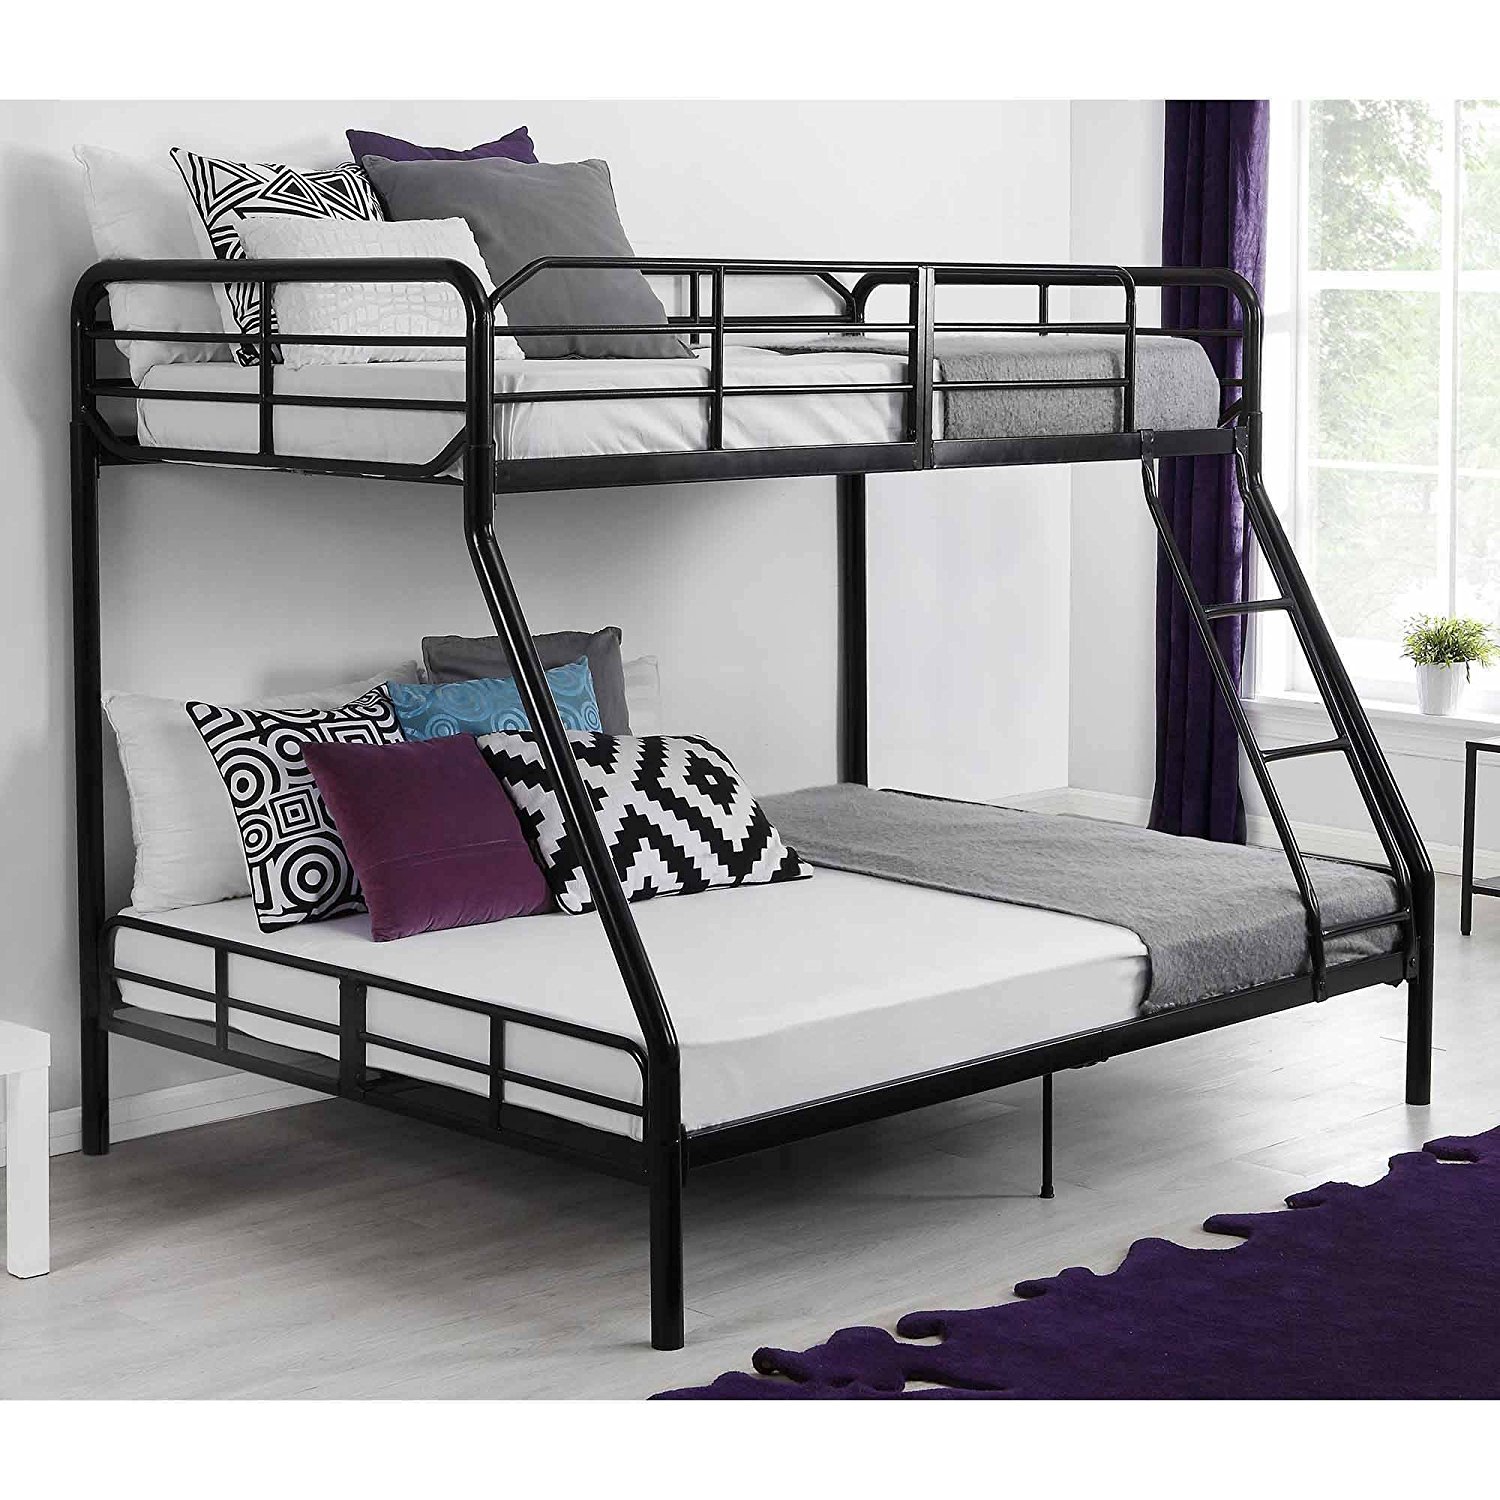 Twin Over Full Bunk Bed Kids Teens Bedroom Dorm Furniture Metal Beds Bunkbeds with Ladder Black by Mainstays